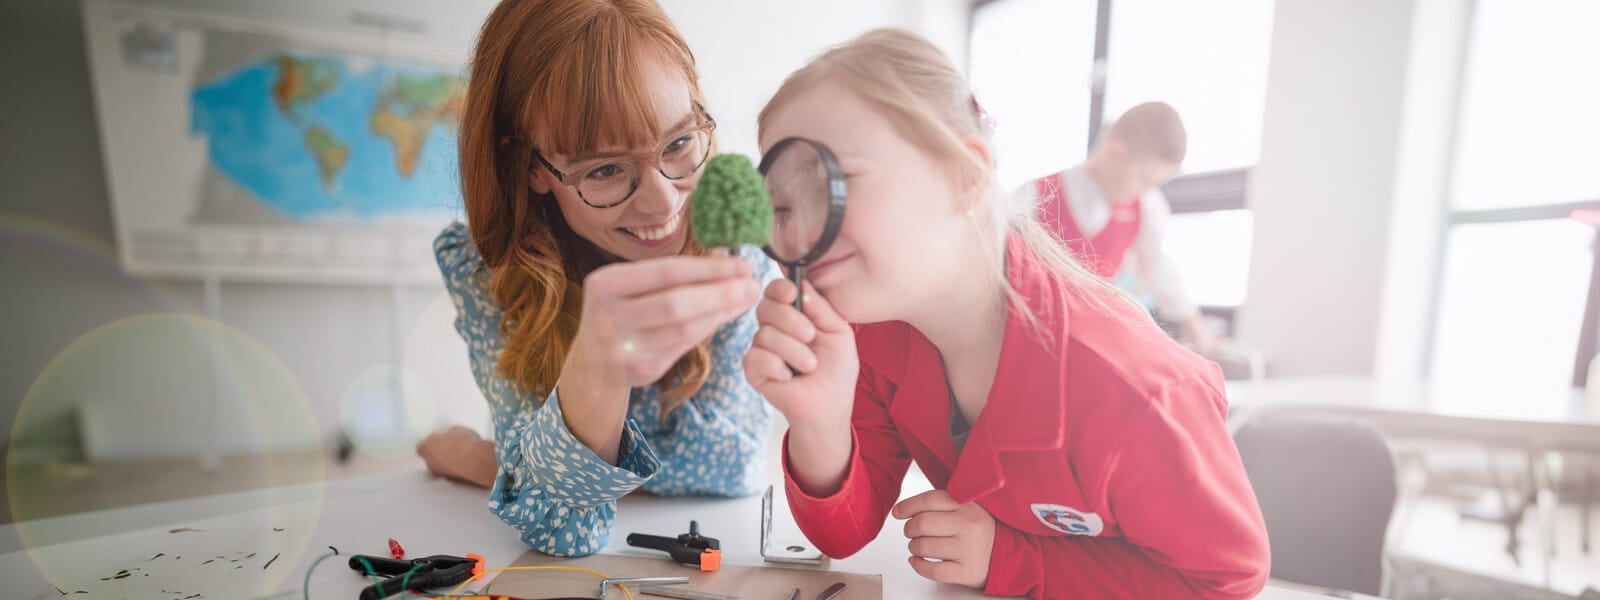 female teacher using a microscope with a special needs female elementary school child